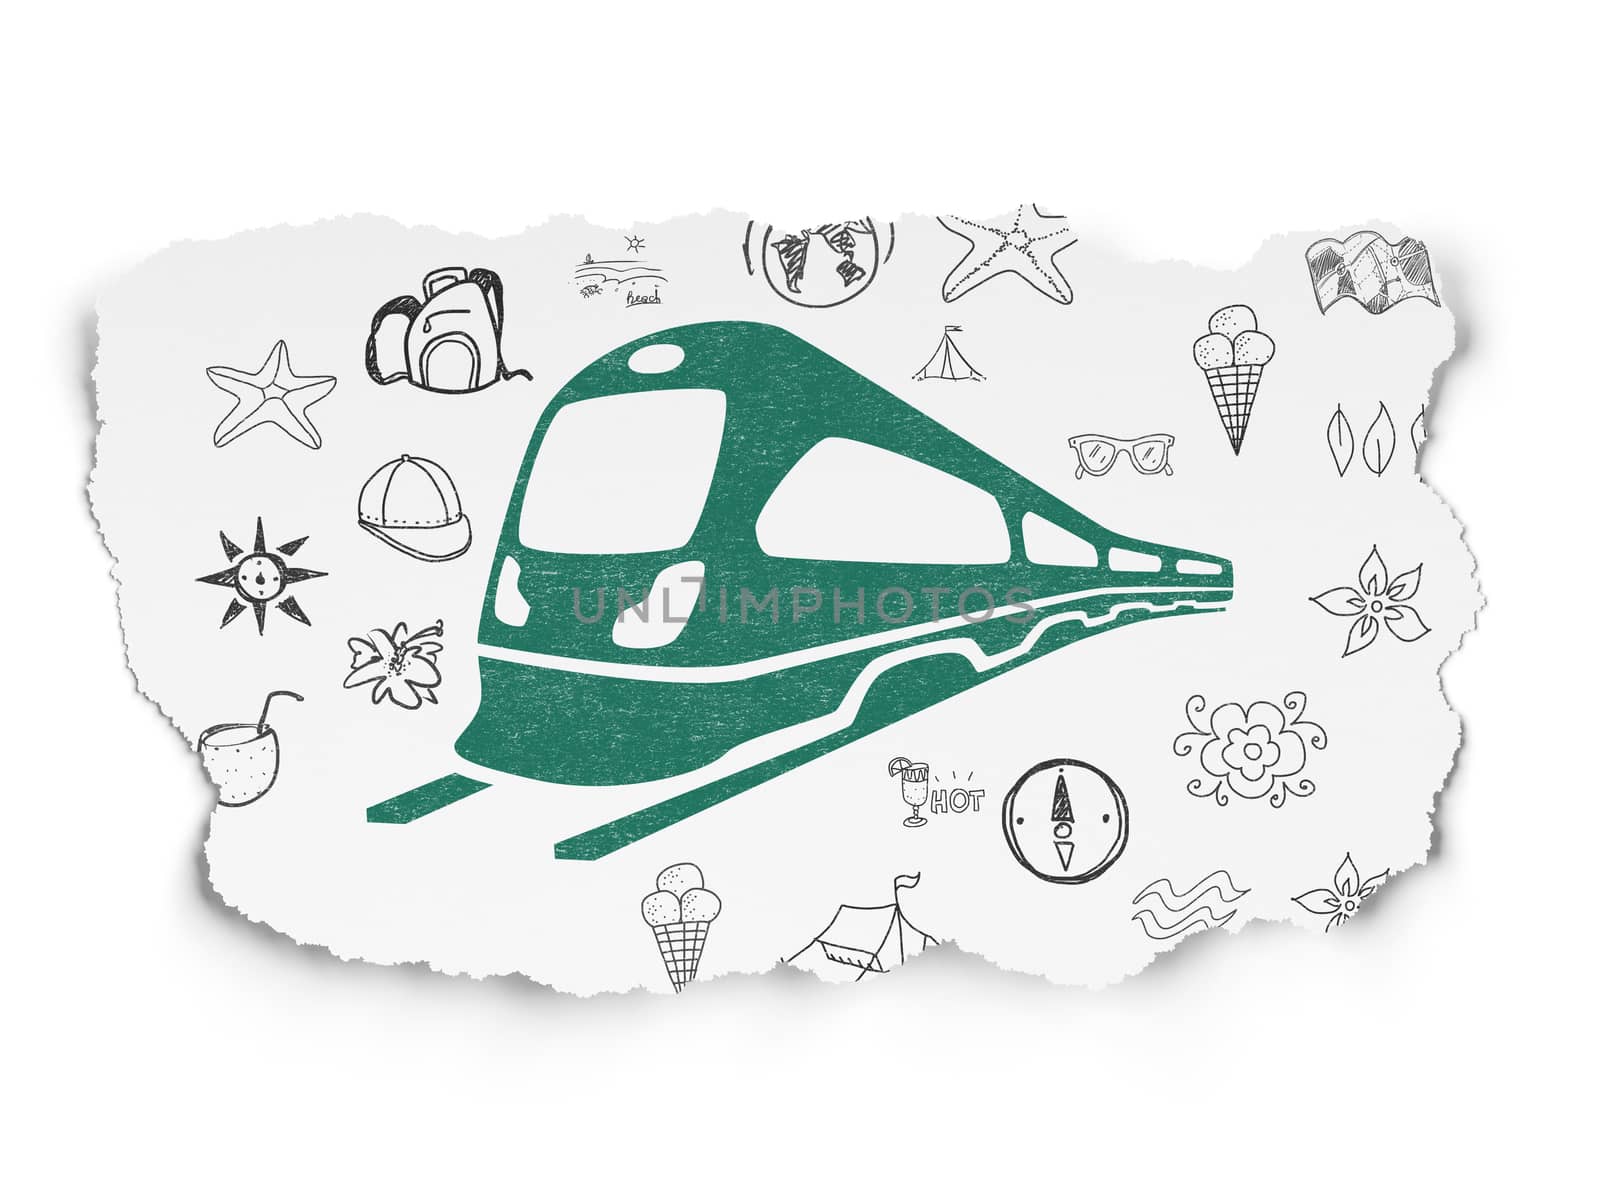 Vacation concept: Painted green Train icon on Torn Paper background with  Hand Drawn Vacation Icons